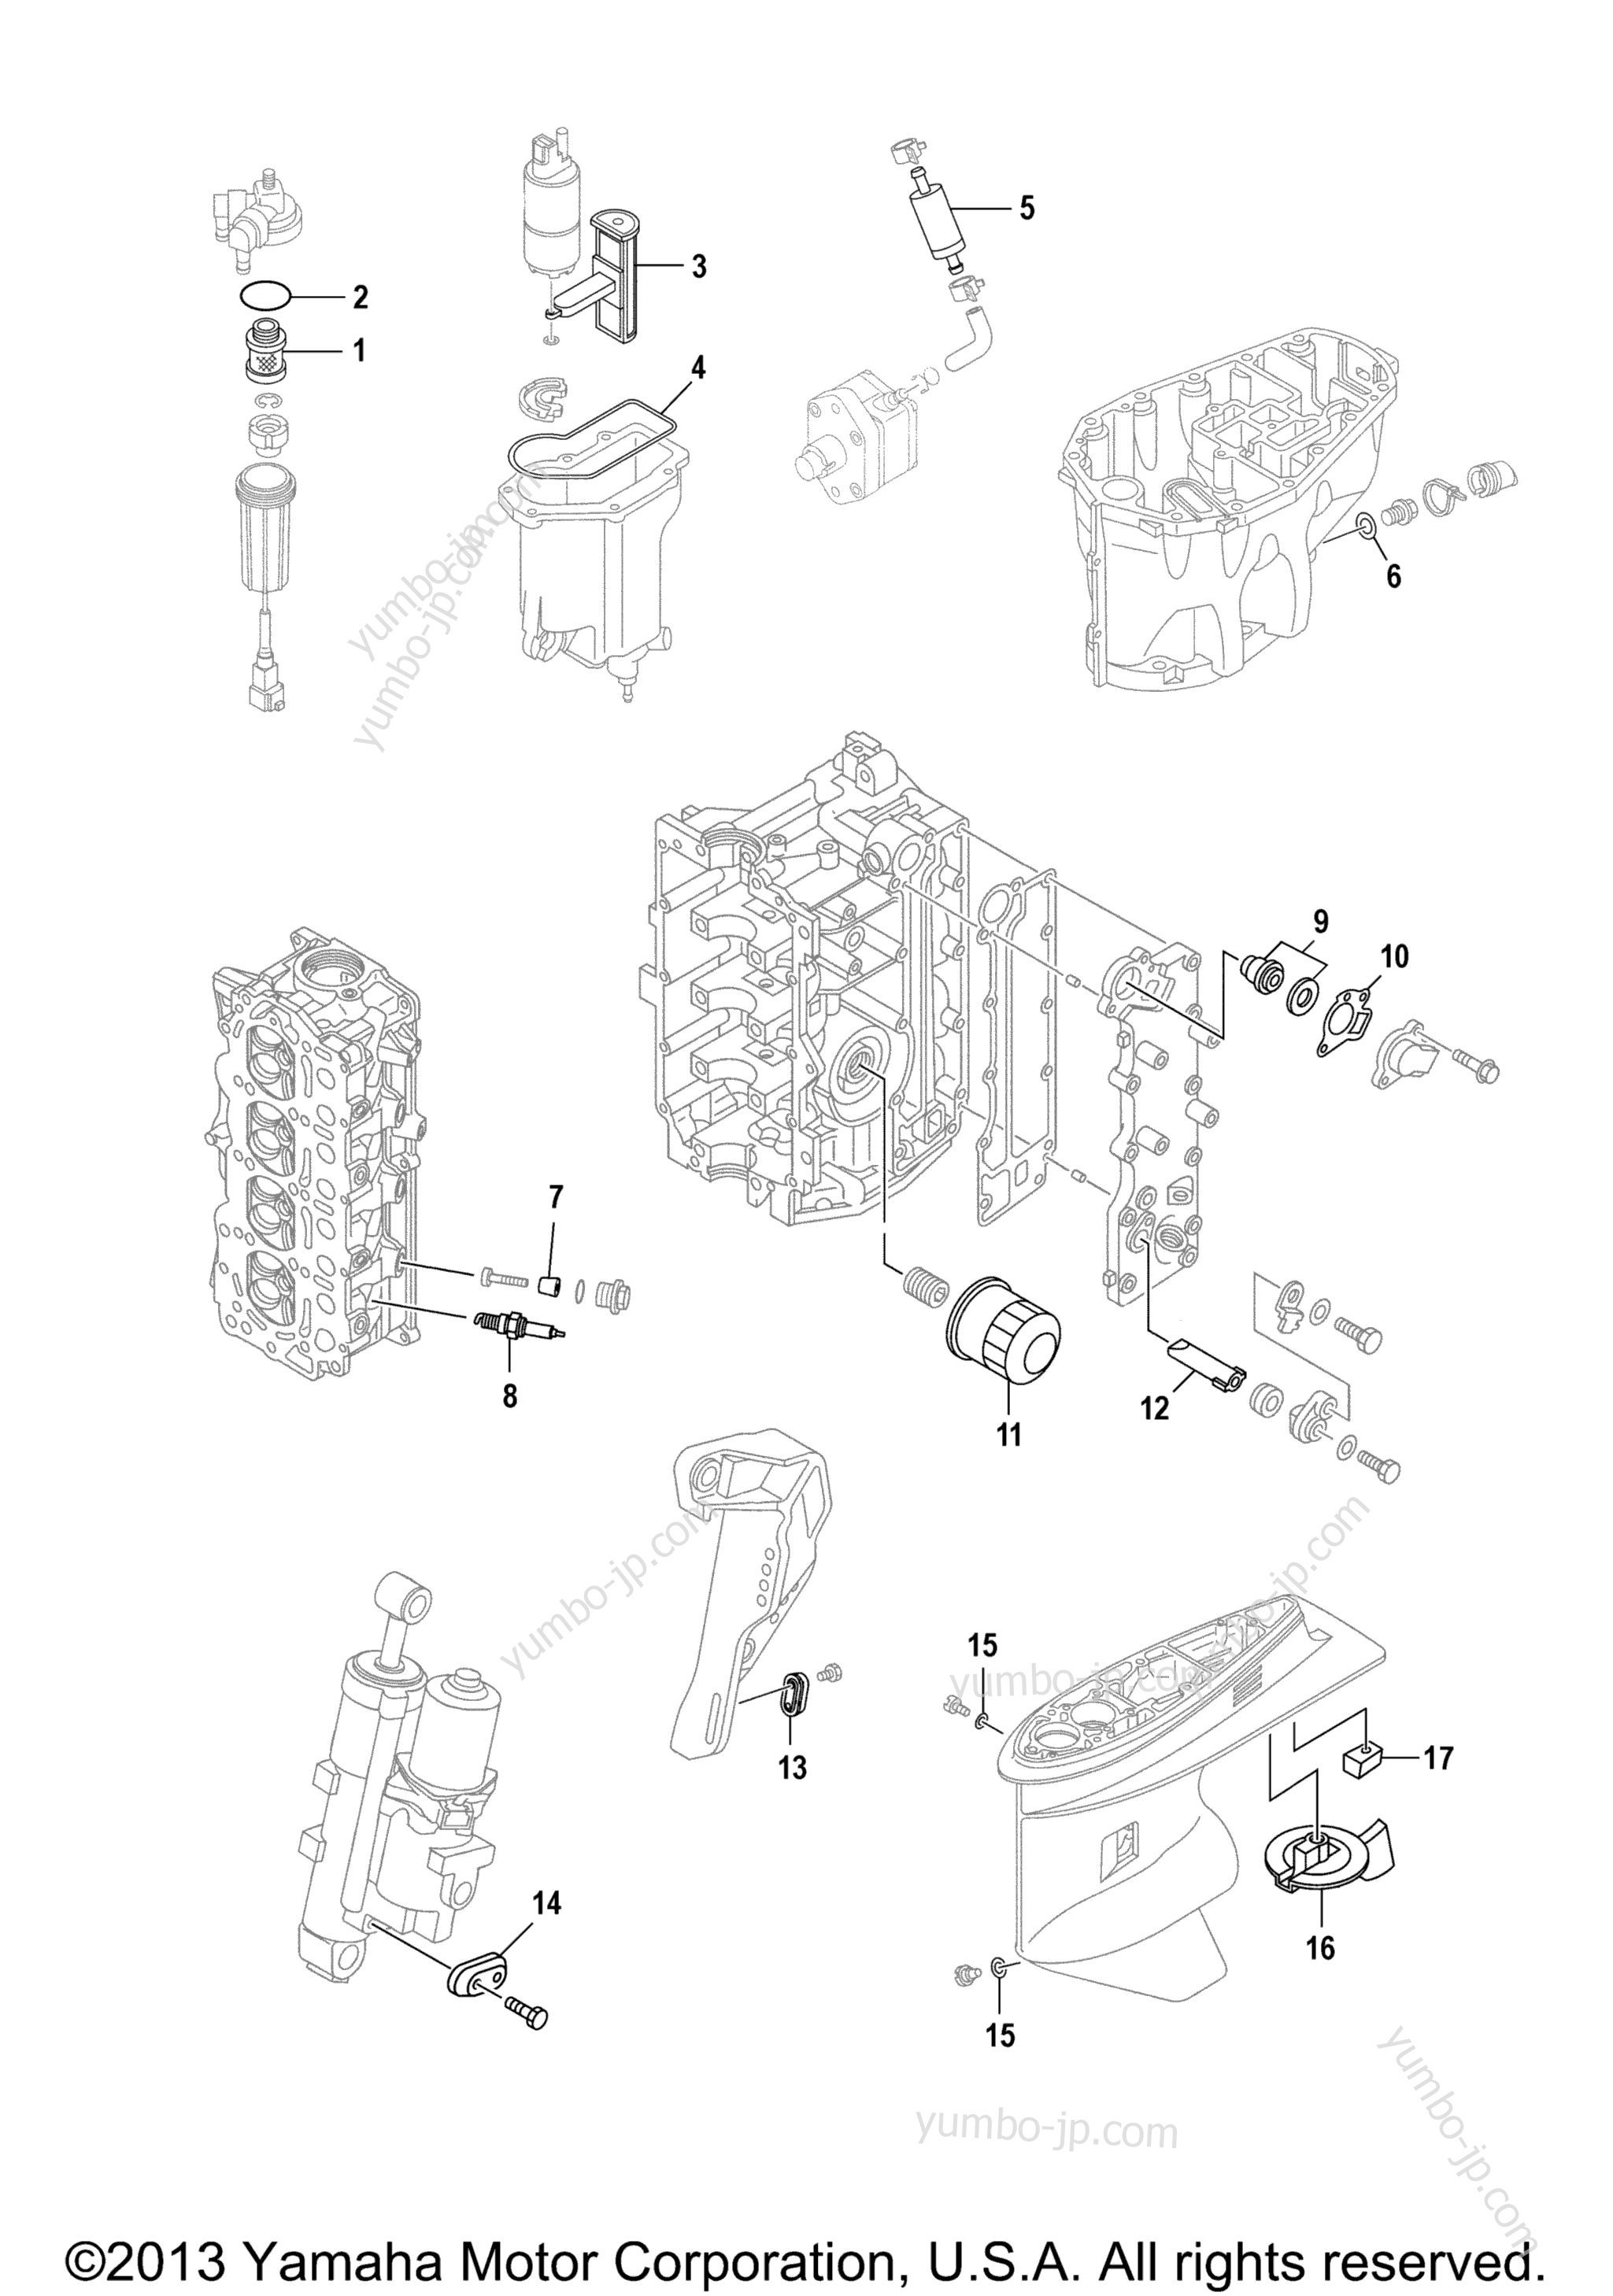 Scheduled Service Parts for outboards YAMAHA F60JA_0112 (0112) 2006 year